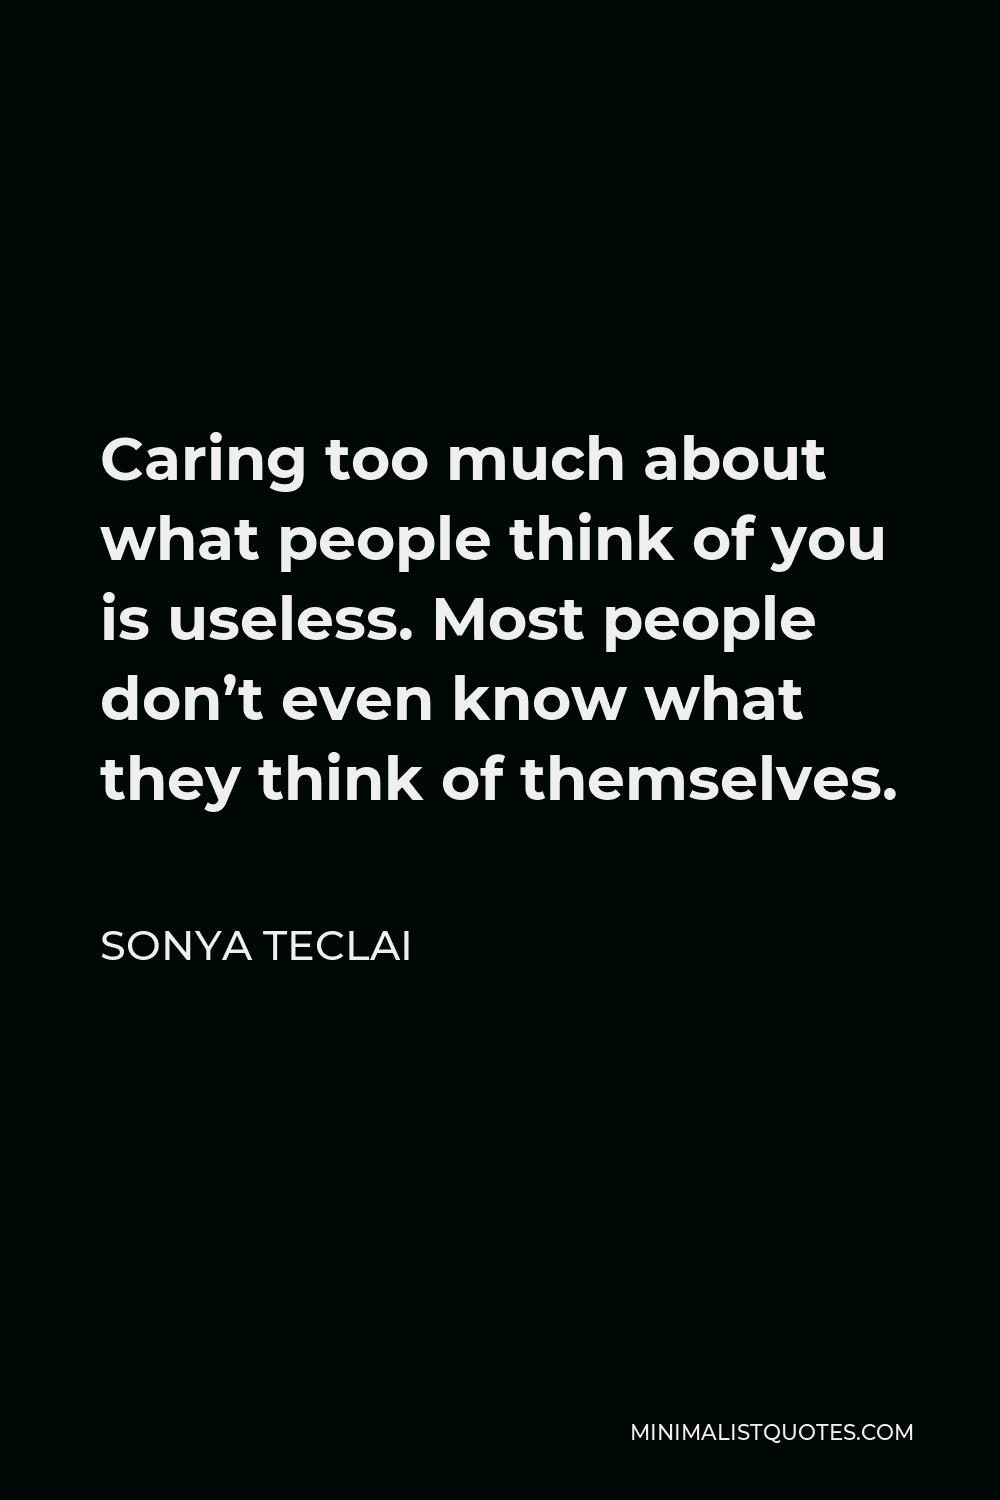 Sonya Teclai Quote - Caring too much about what people think of you is useless. Most people don’t even know what they think of themselves.